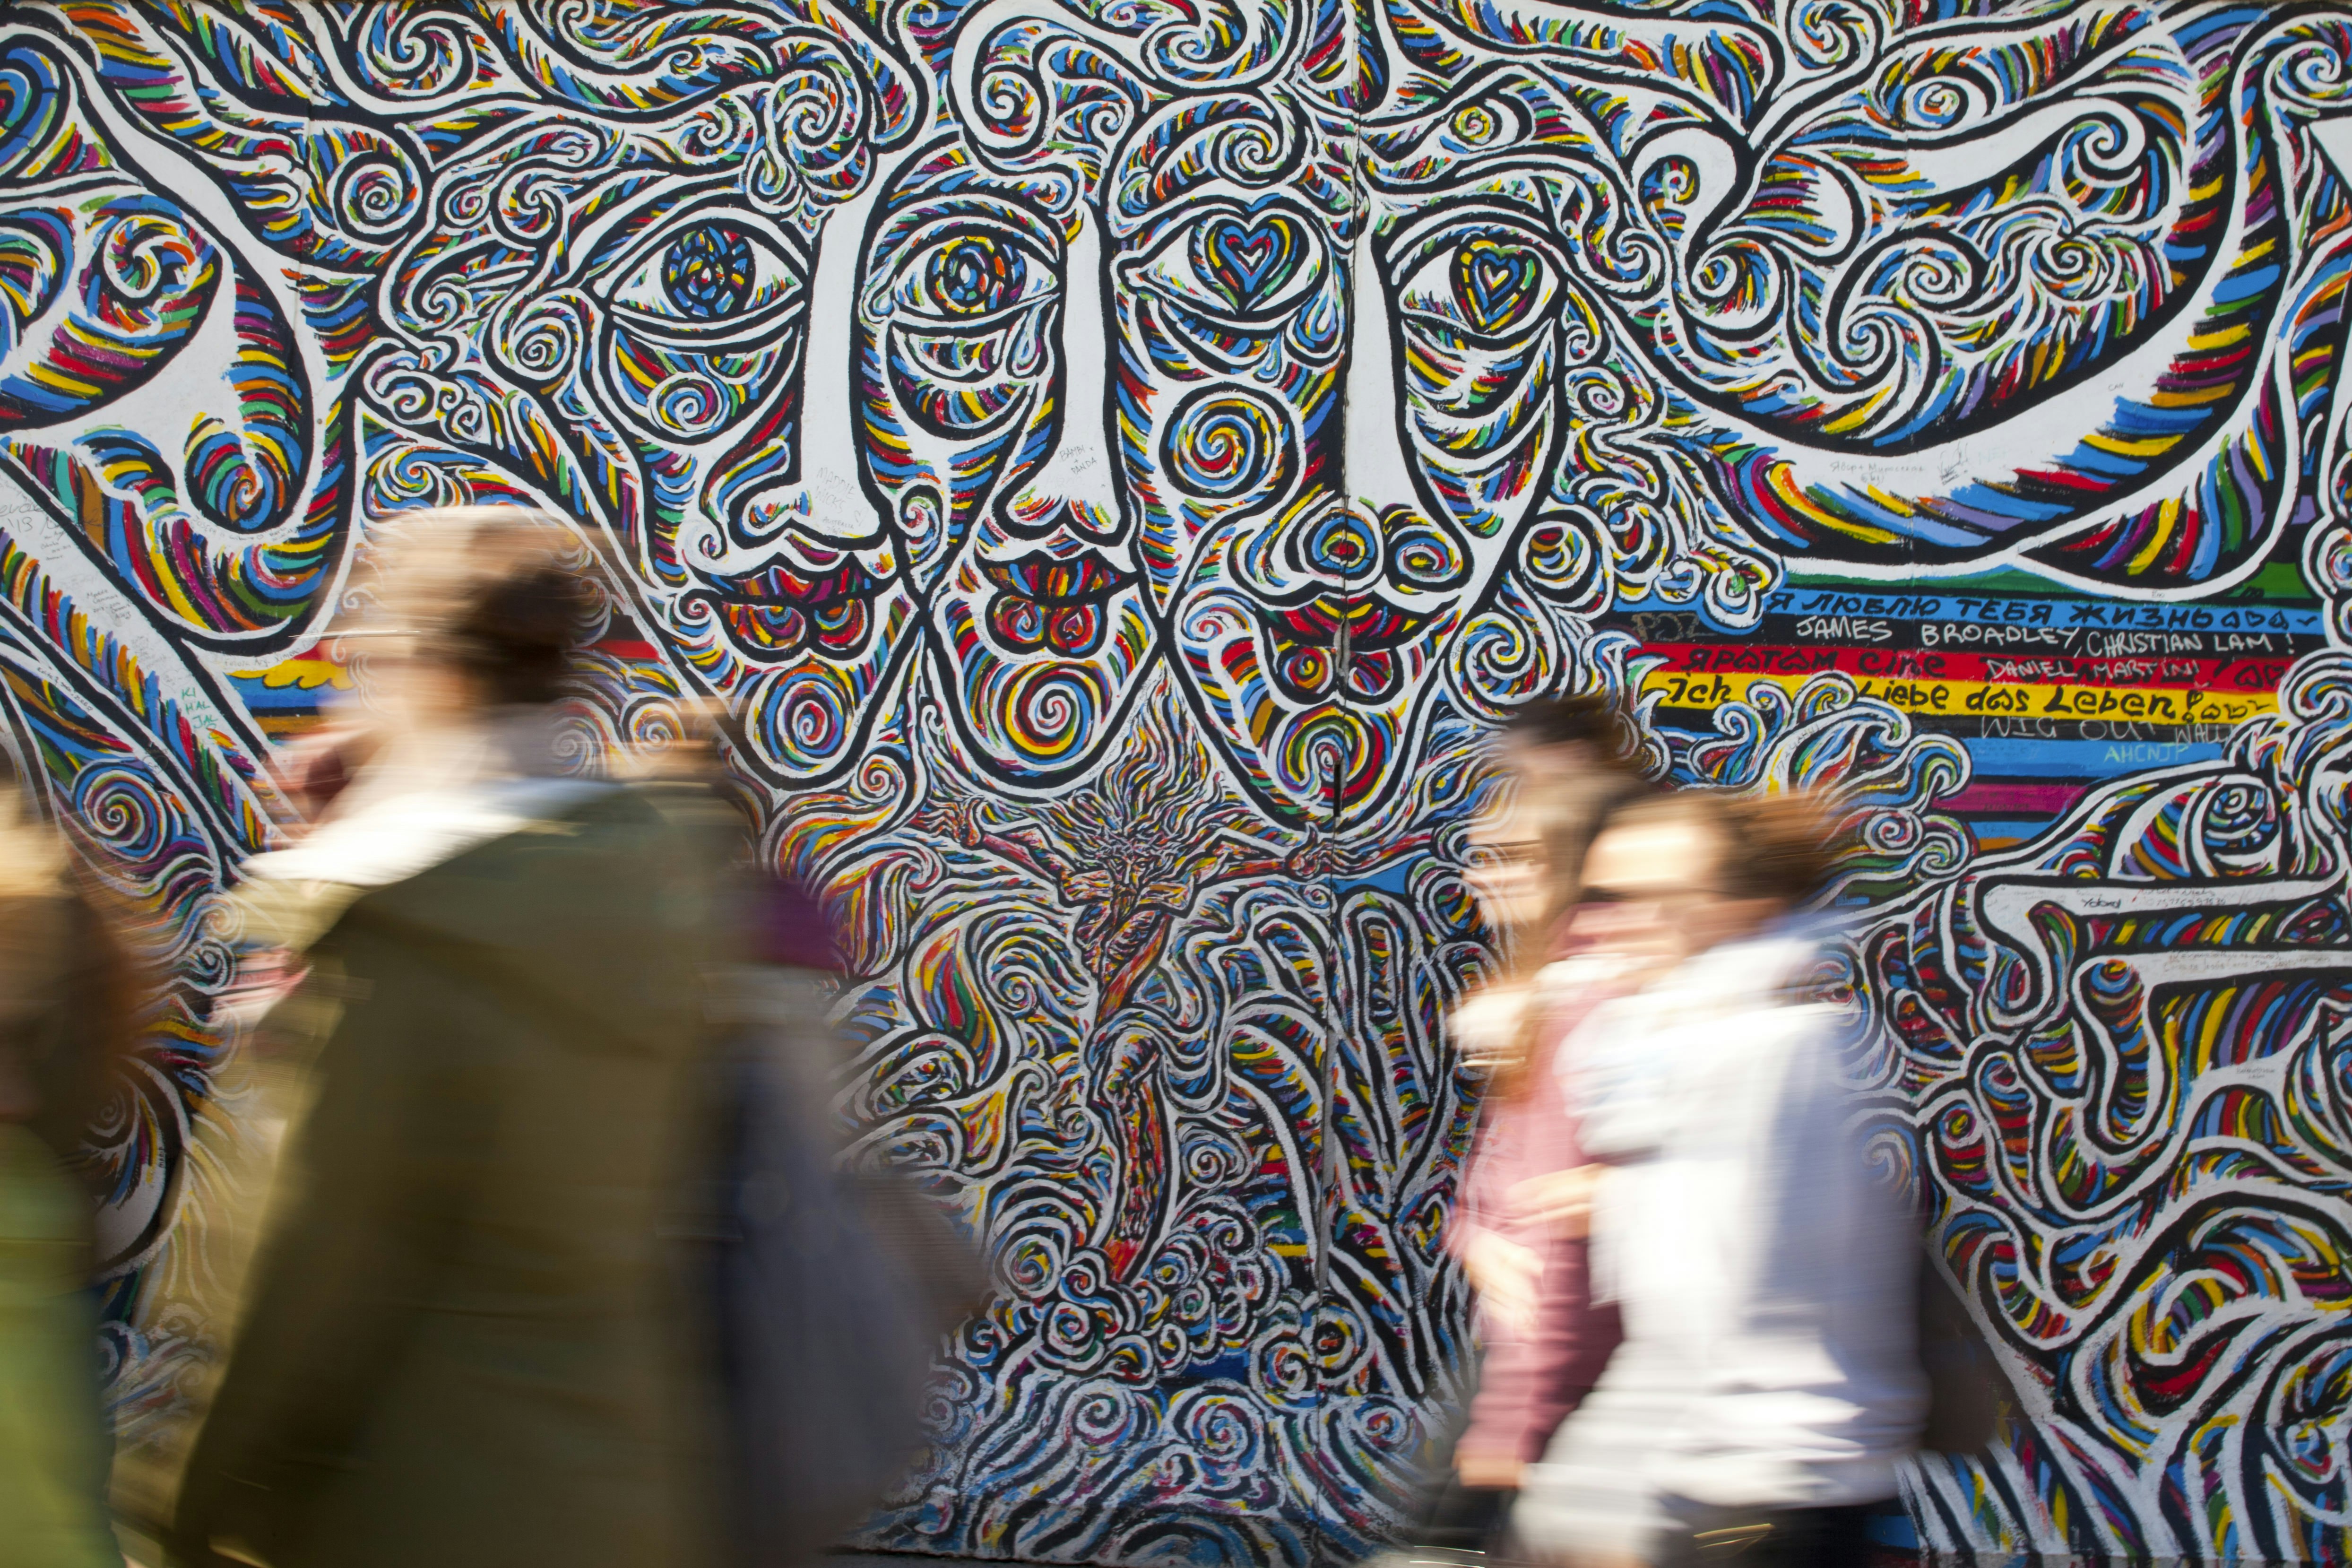 People walk past a colorful mural in Germany's capital